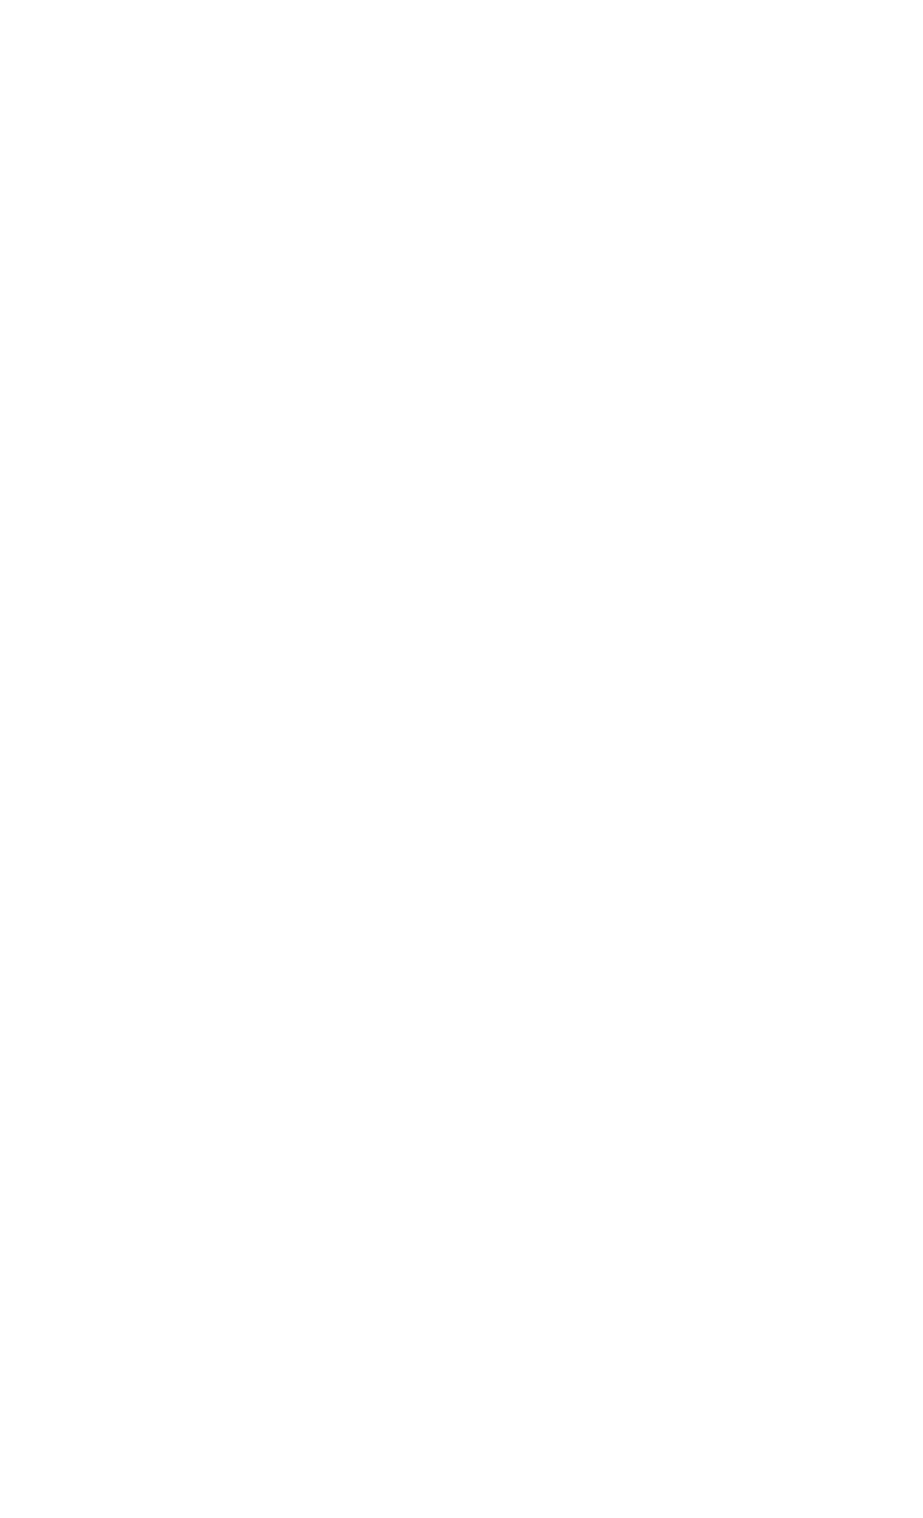 Kuwait Cement Company logo for dark backgrounds (transparent PNG)